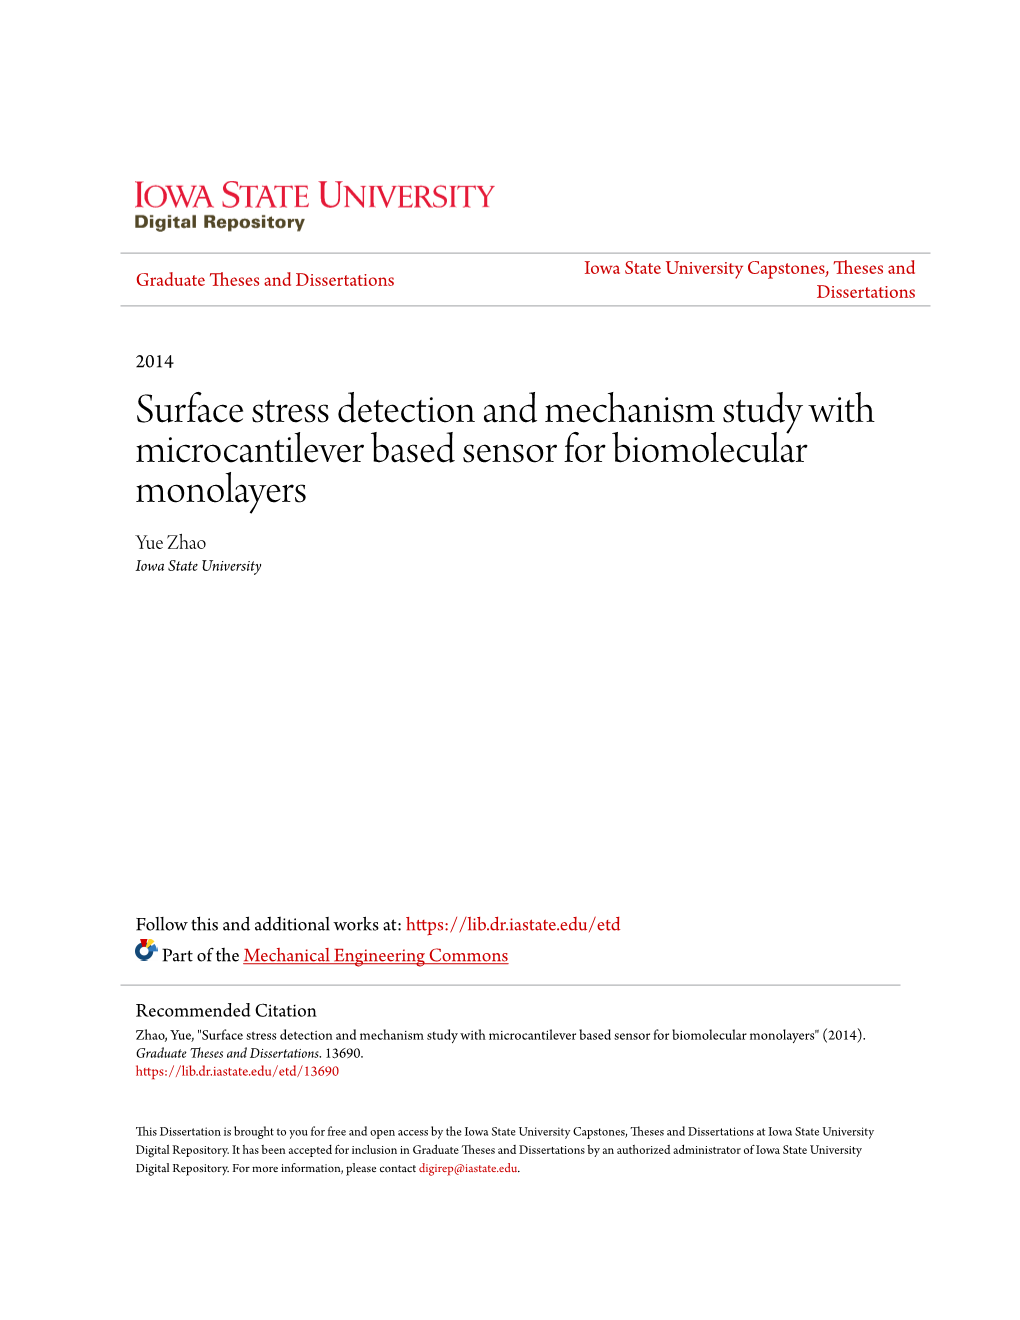 Surface Stress Detection and Mechanism Study with Microcantilever Based Sensor for Biomolecular Monolayers Yue Zhao Iowa State University